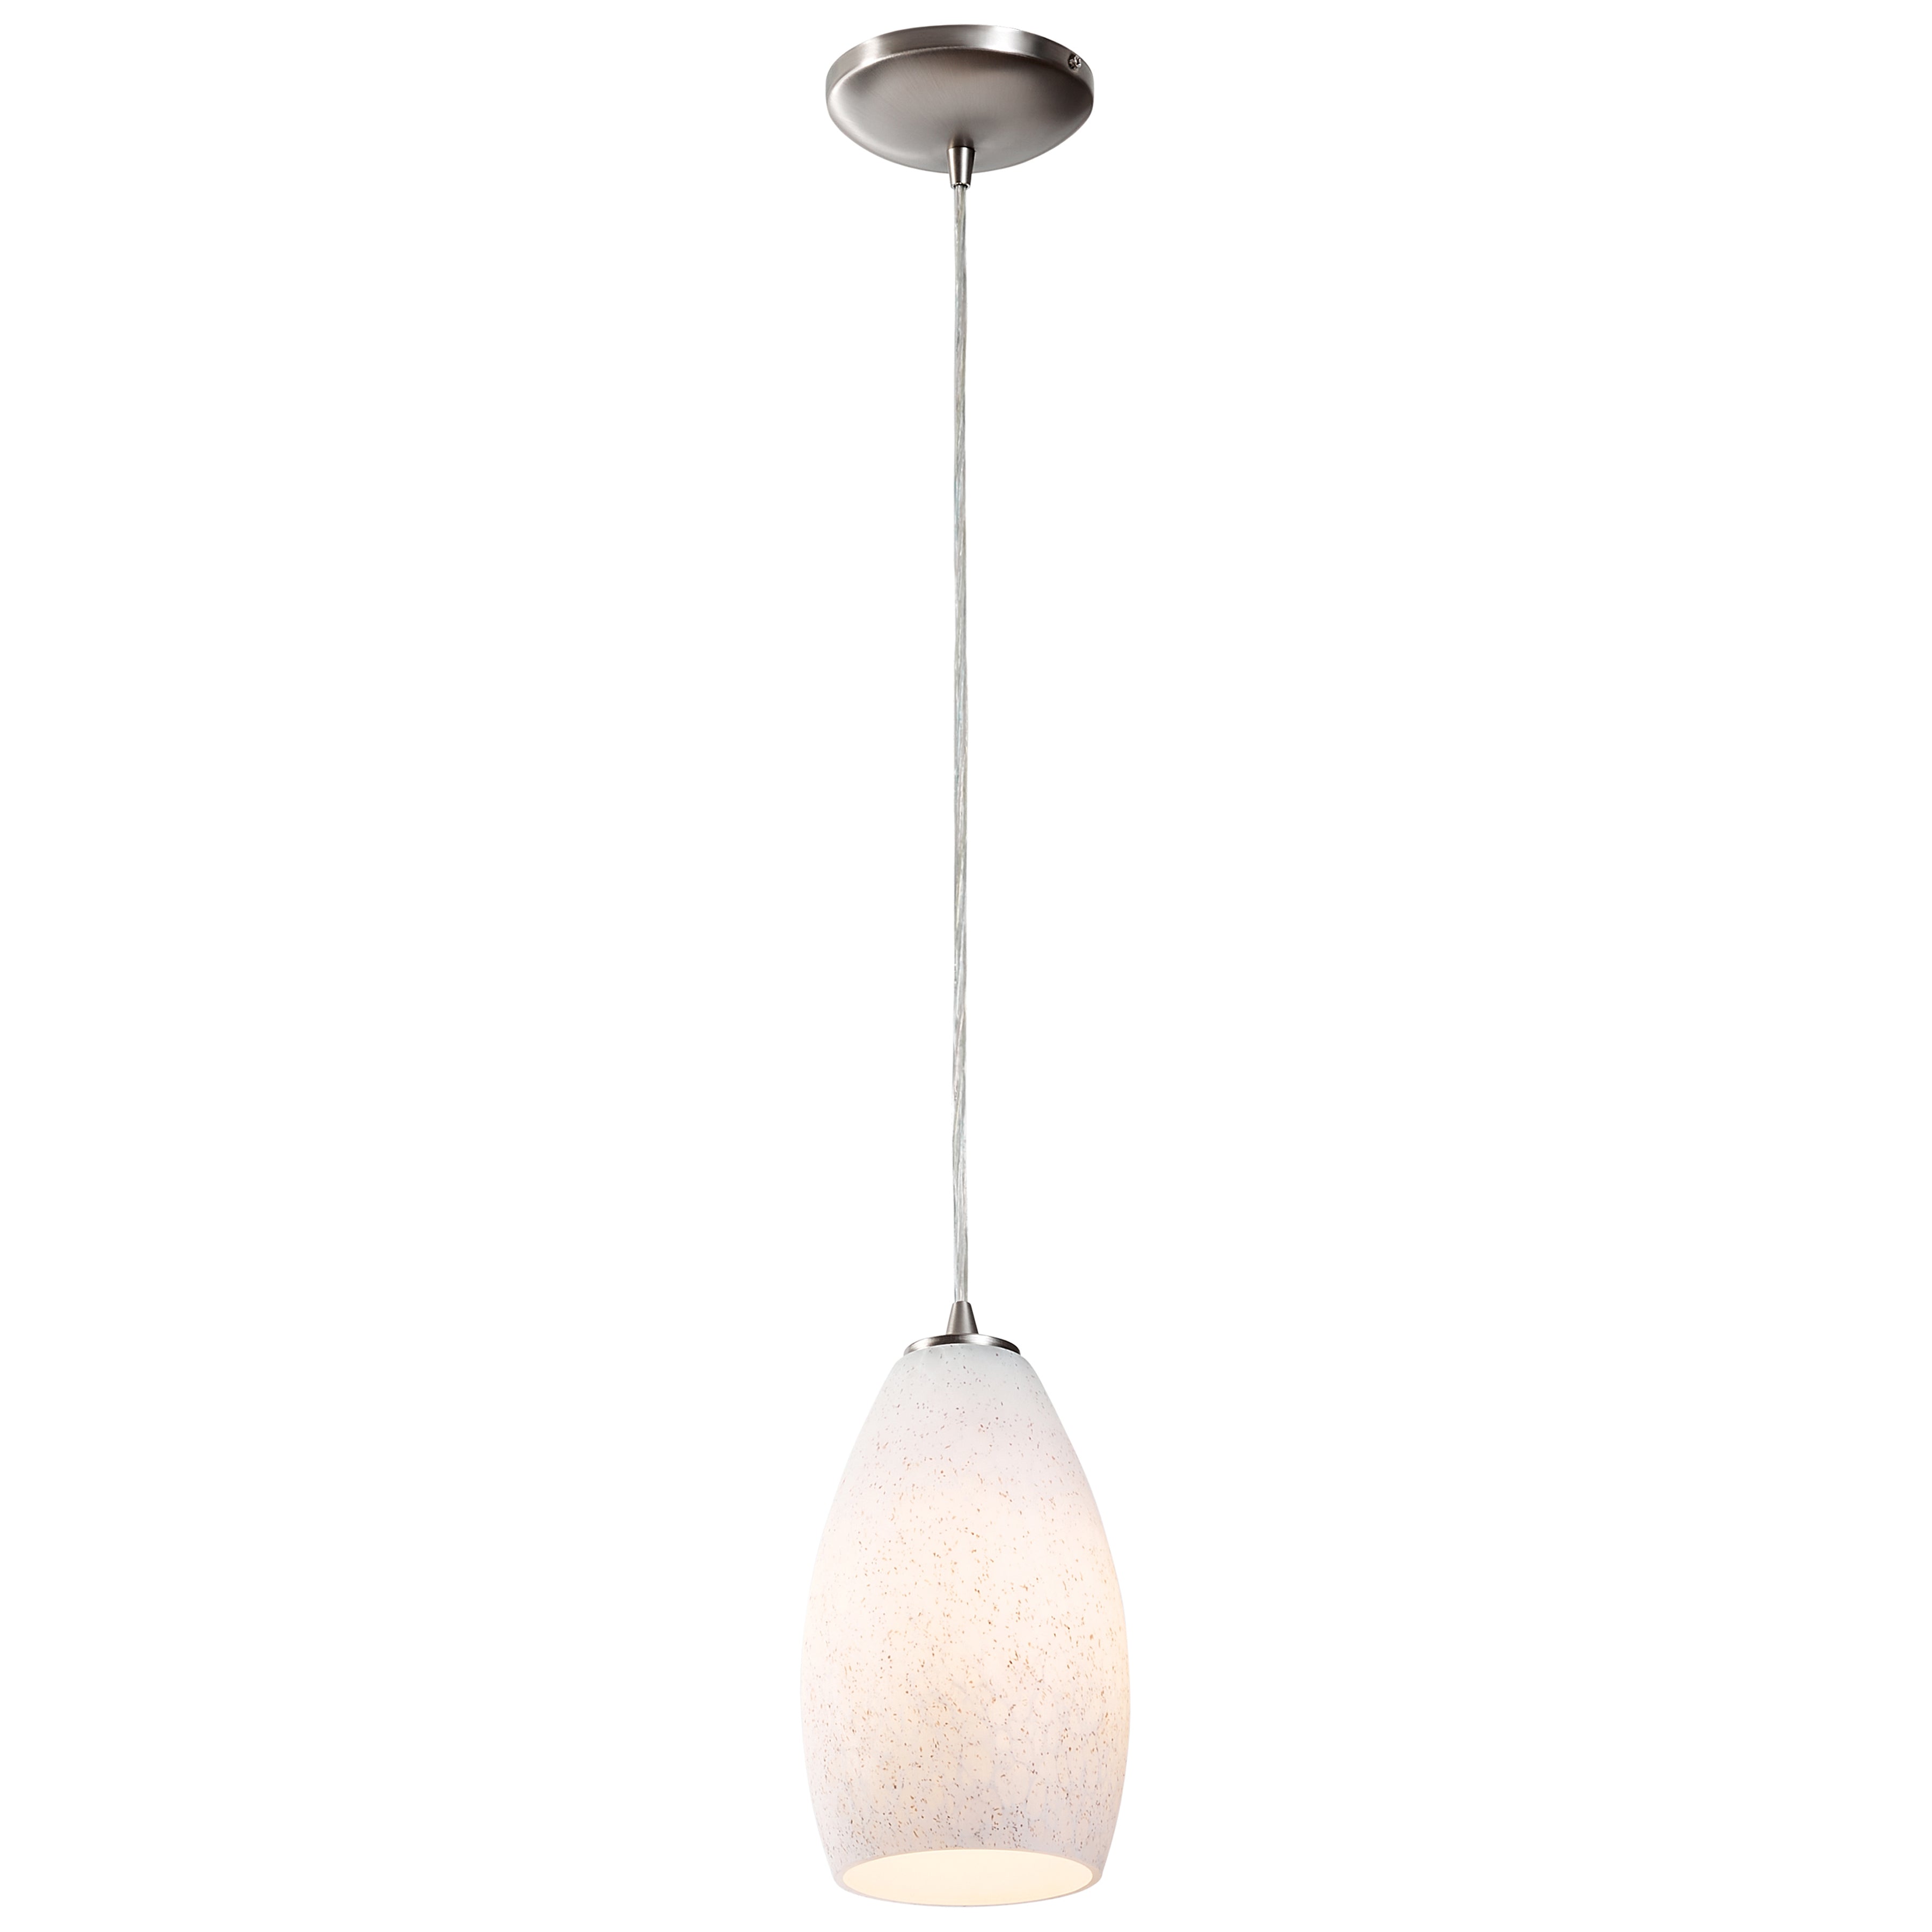 Access Lighting Champagne Pendant - Brushed Steel